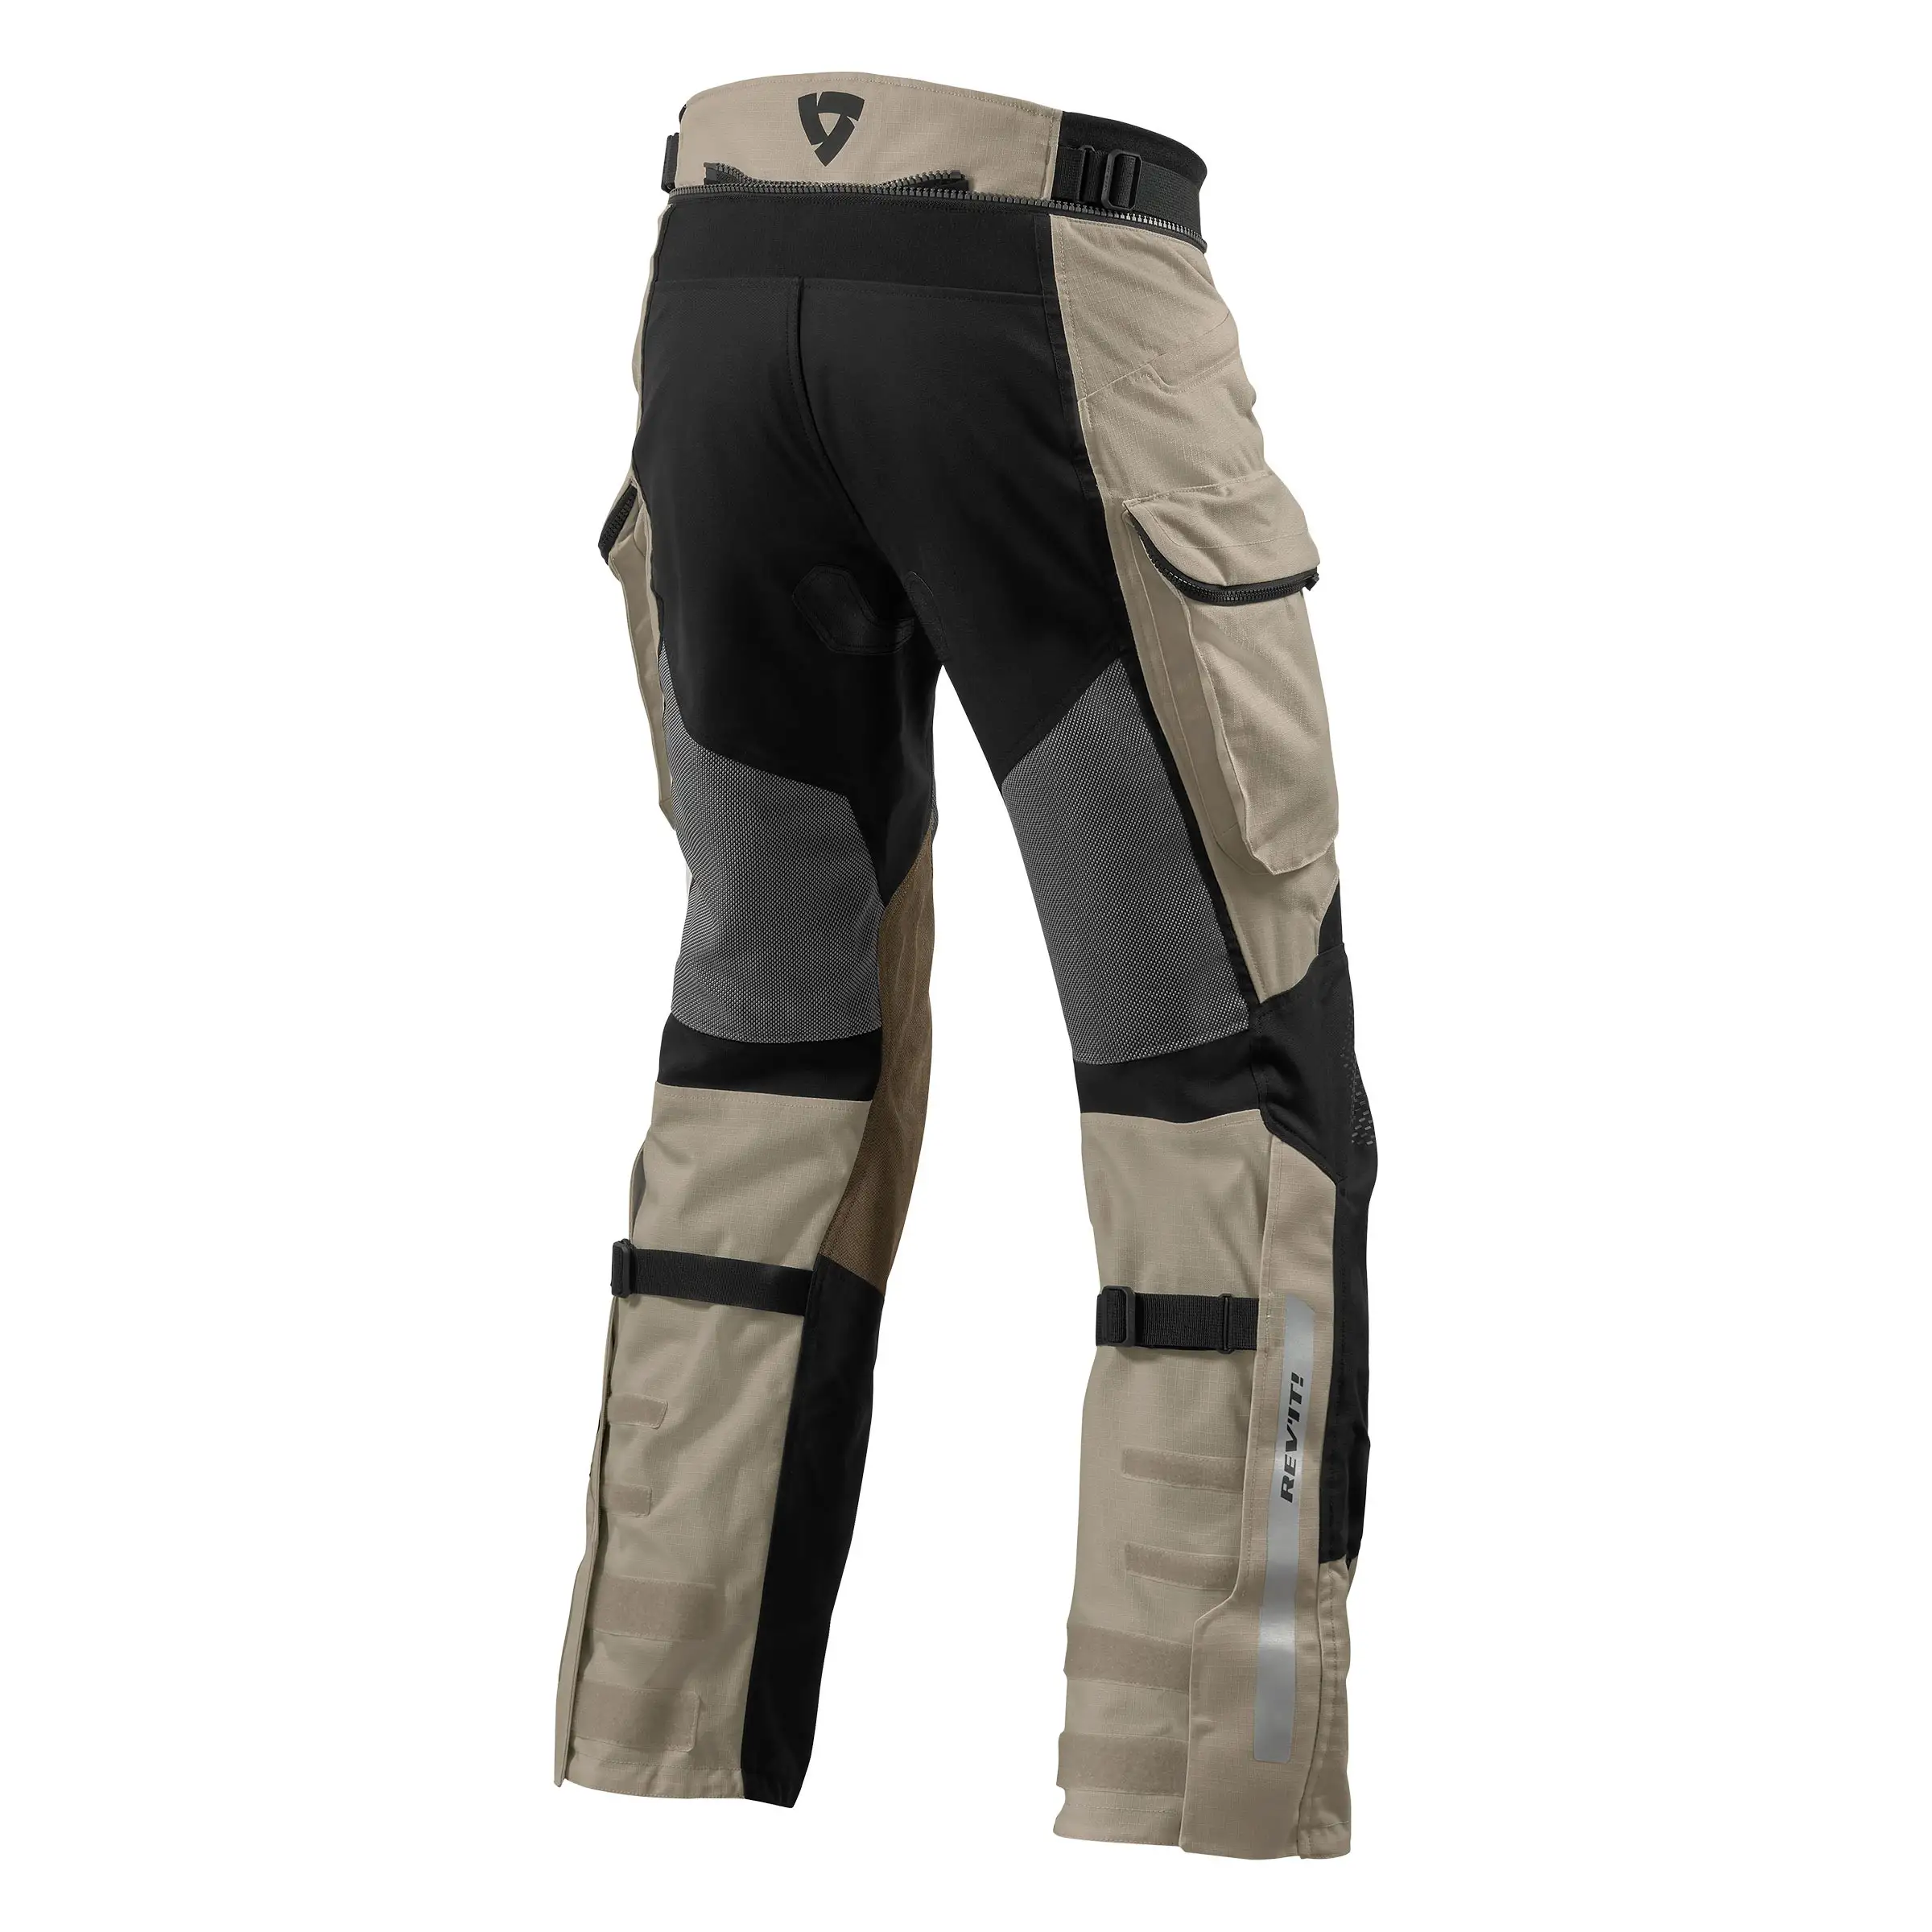 Details more than 61 motorcycle trousers review latest - in.duhocakina